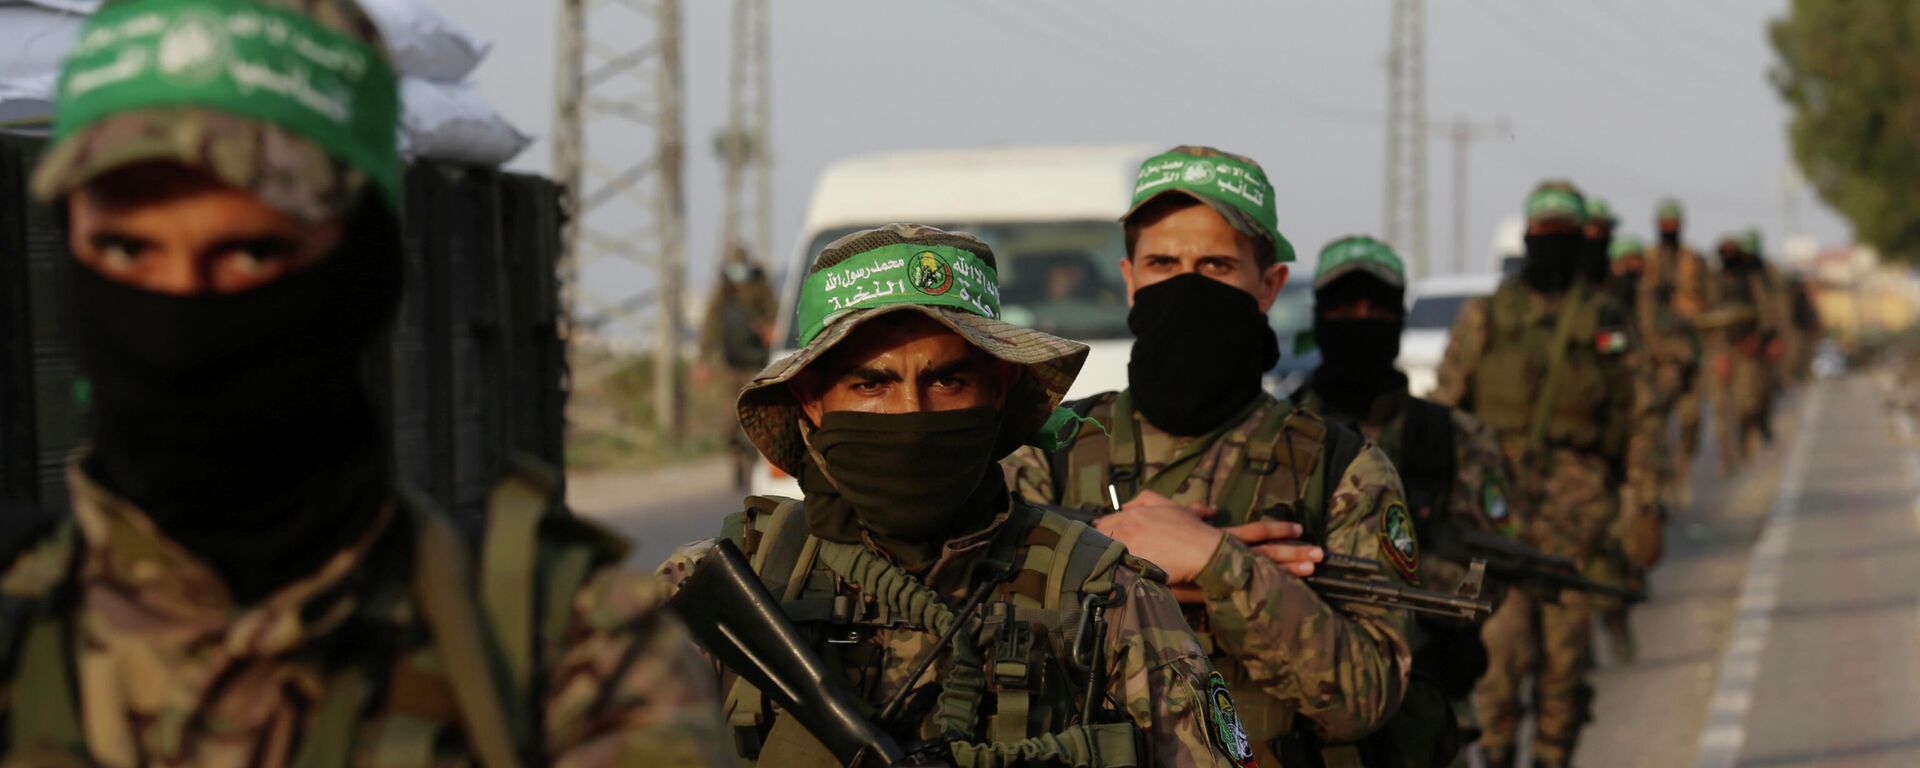 Masked militants from the Izzedine al-Qassam Brigades, a military wing of Hamas, march with their rifles along the main road of the Nusseirat refugee camp, central Gaza Strip, Thursday, 28 October 2021. - Sputnik International, 1920, 19.11.2021